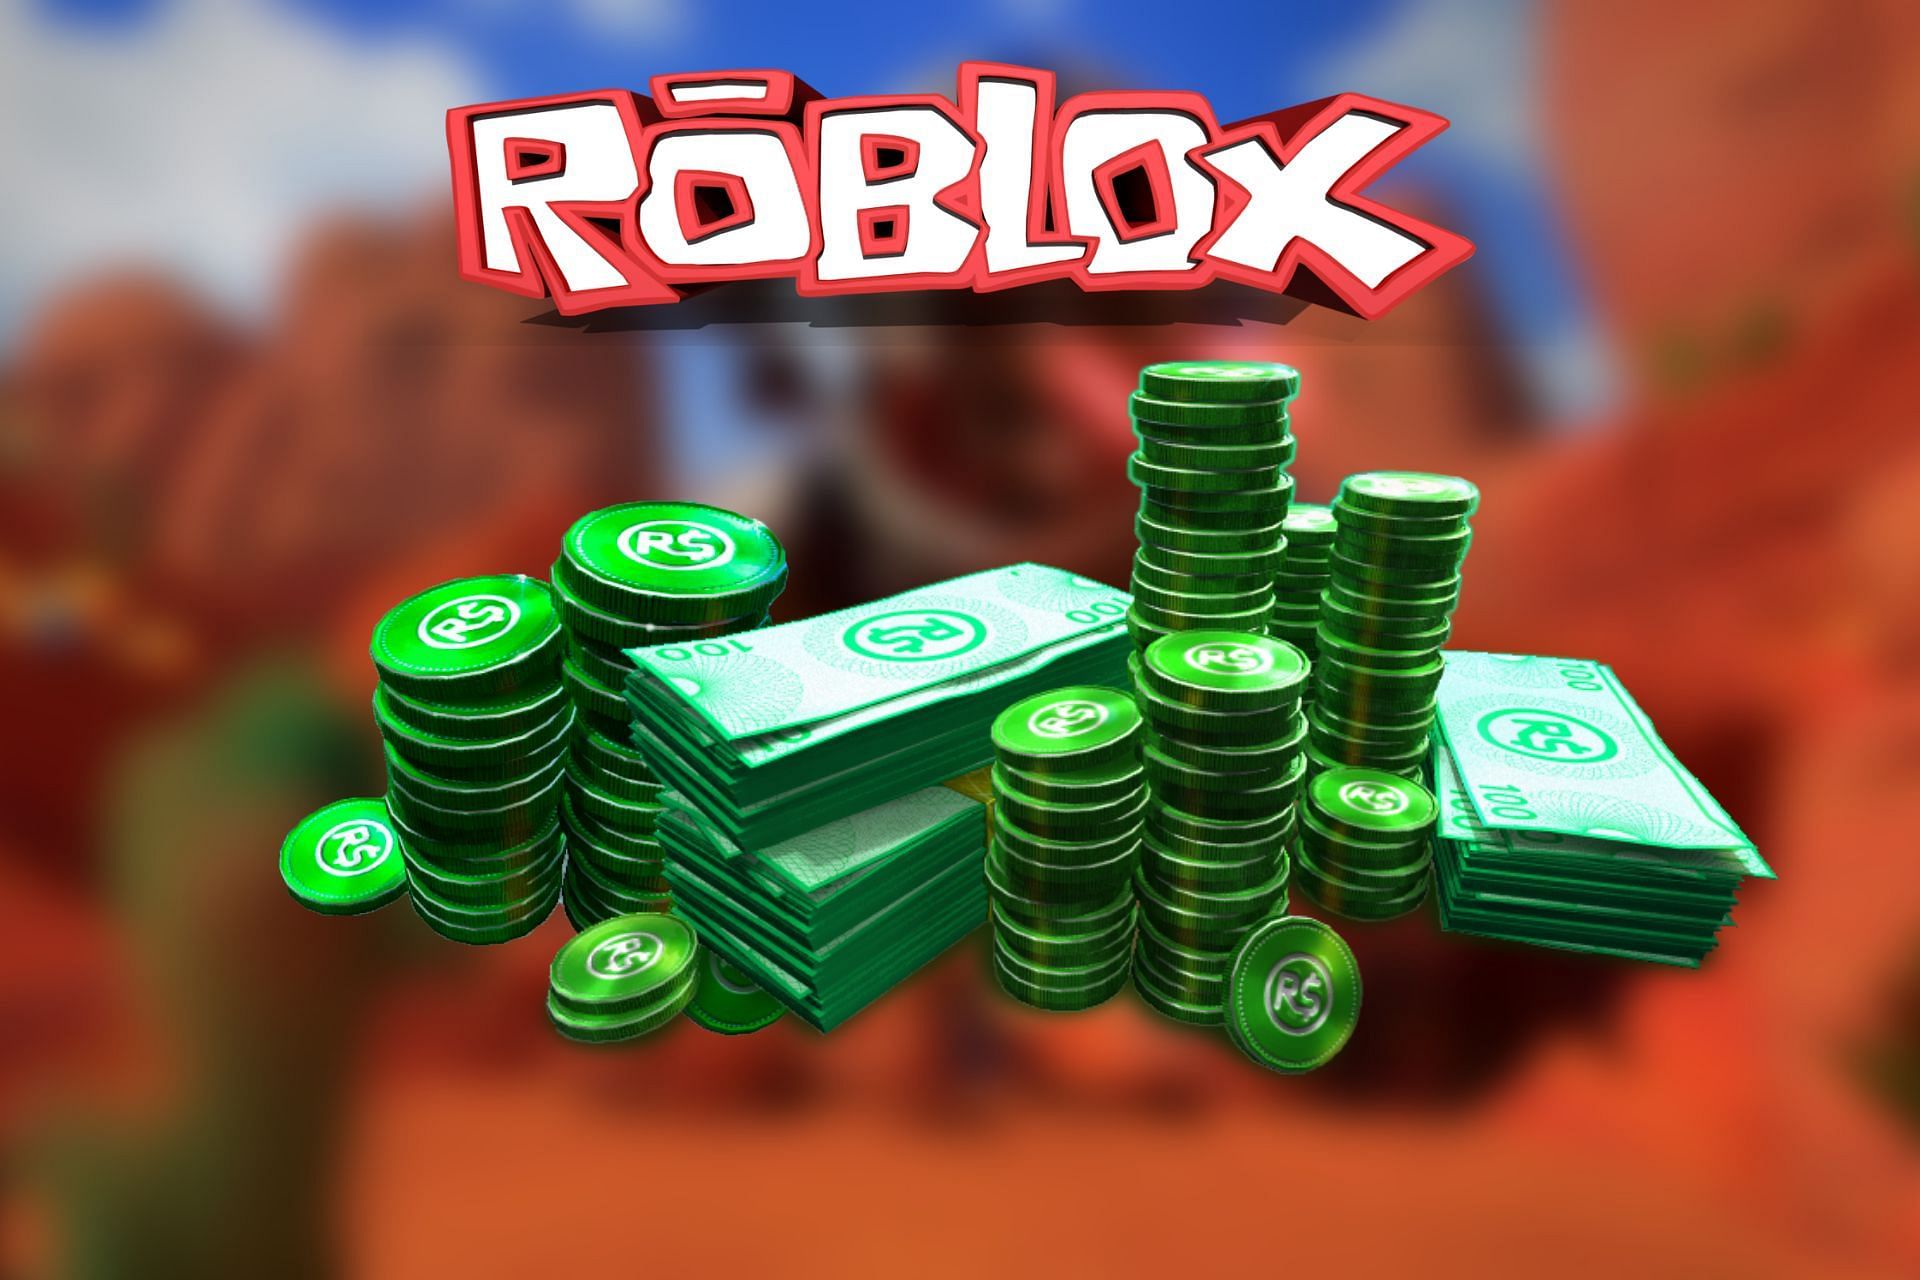 How to Get Free Robux in Roblox: Easy Ways to Do It Without Paying